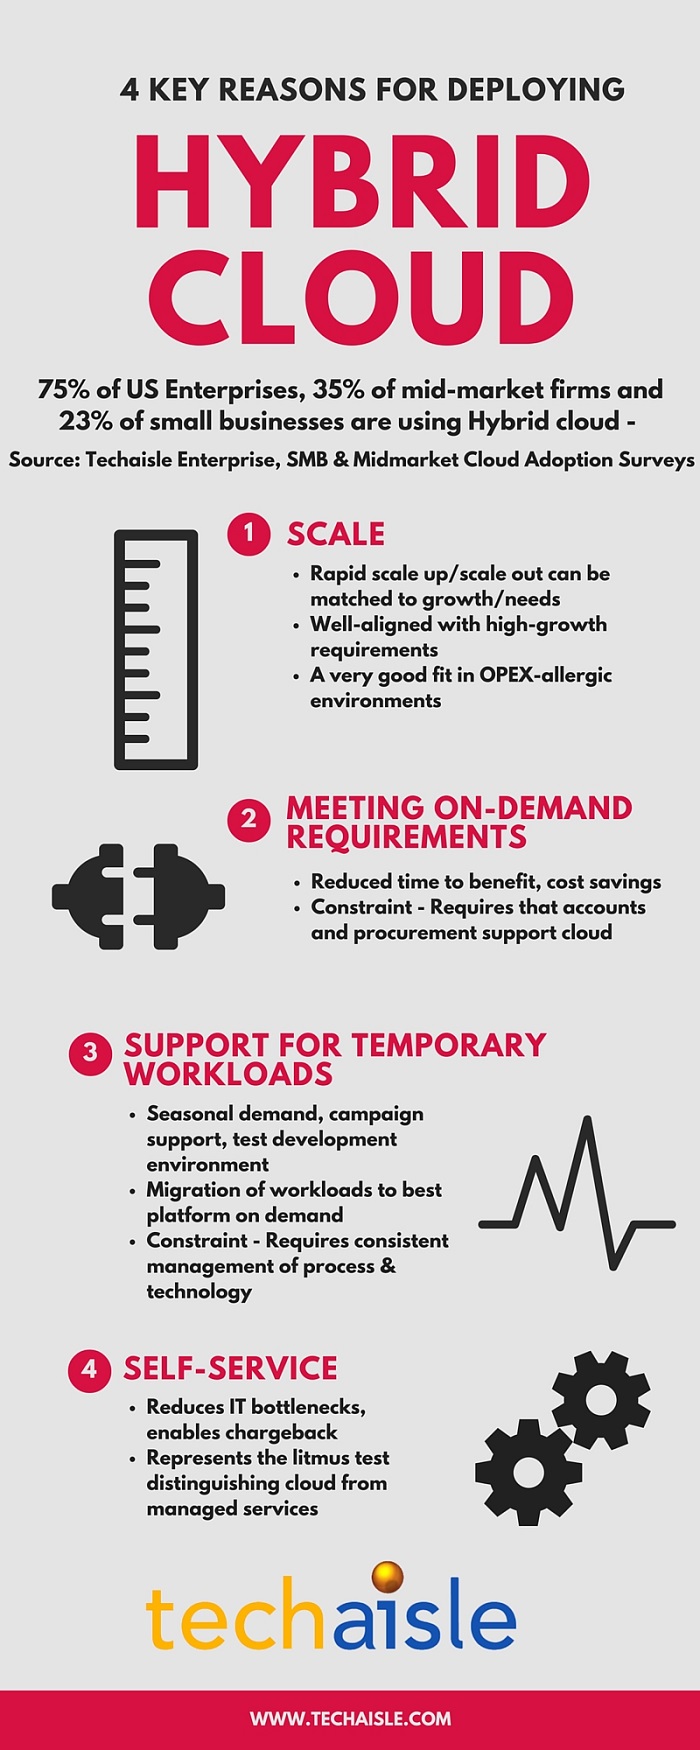 techaisle infographic 4 reasons for deploying hybrid cloud low res